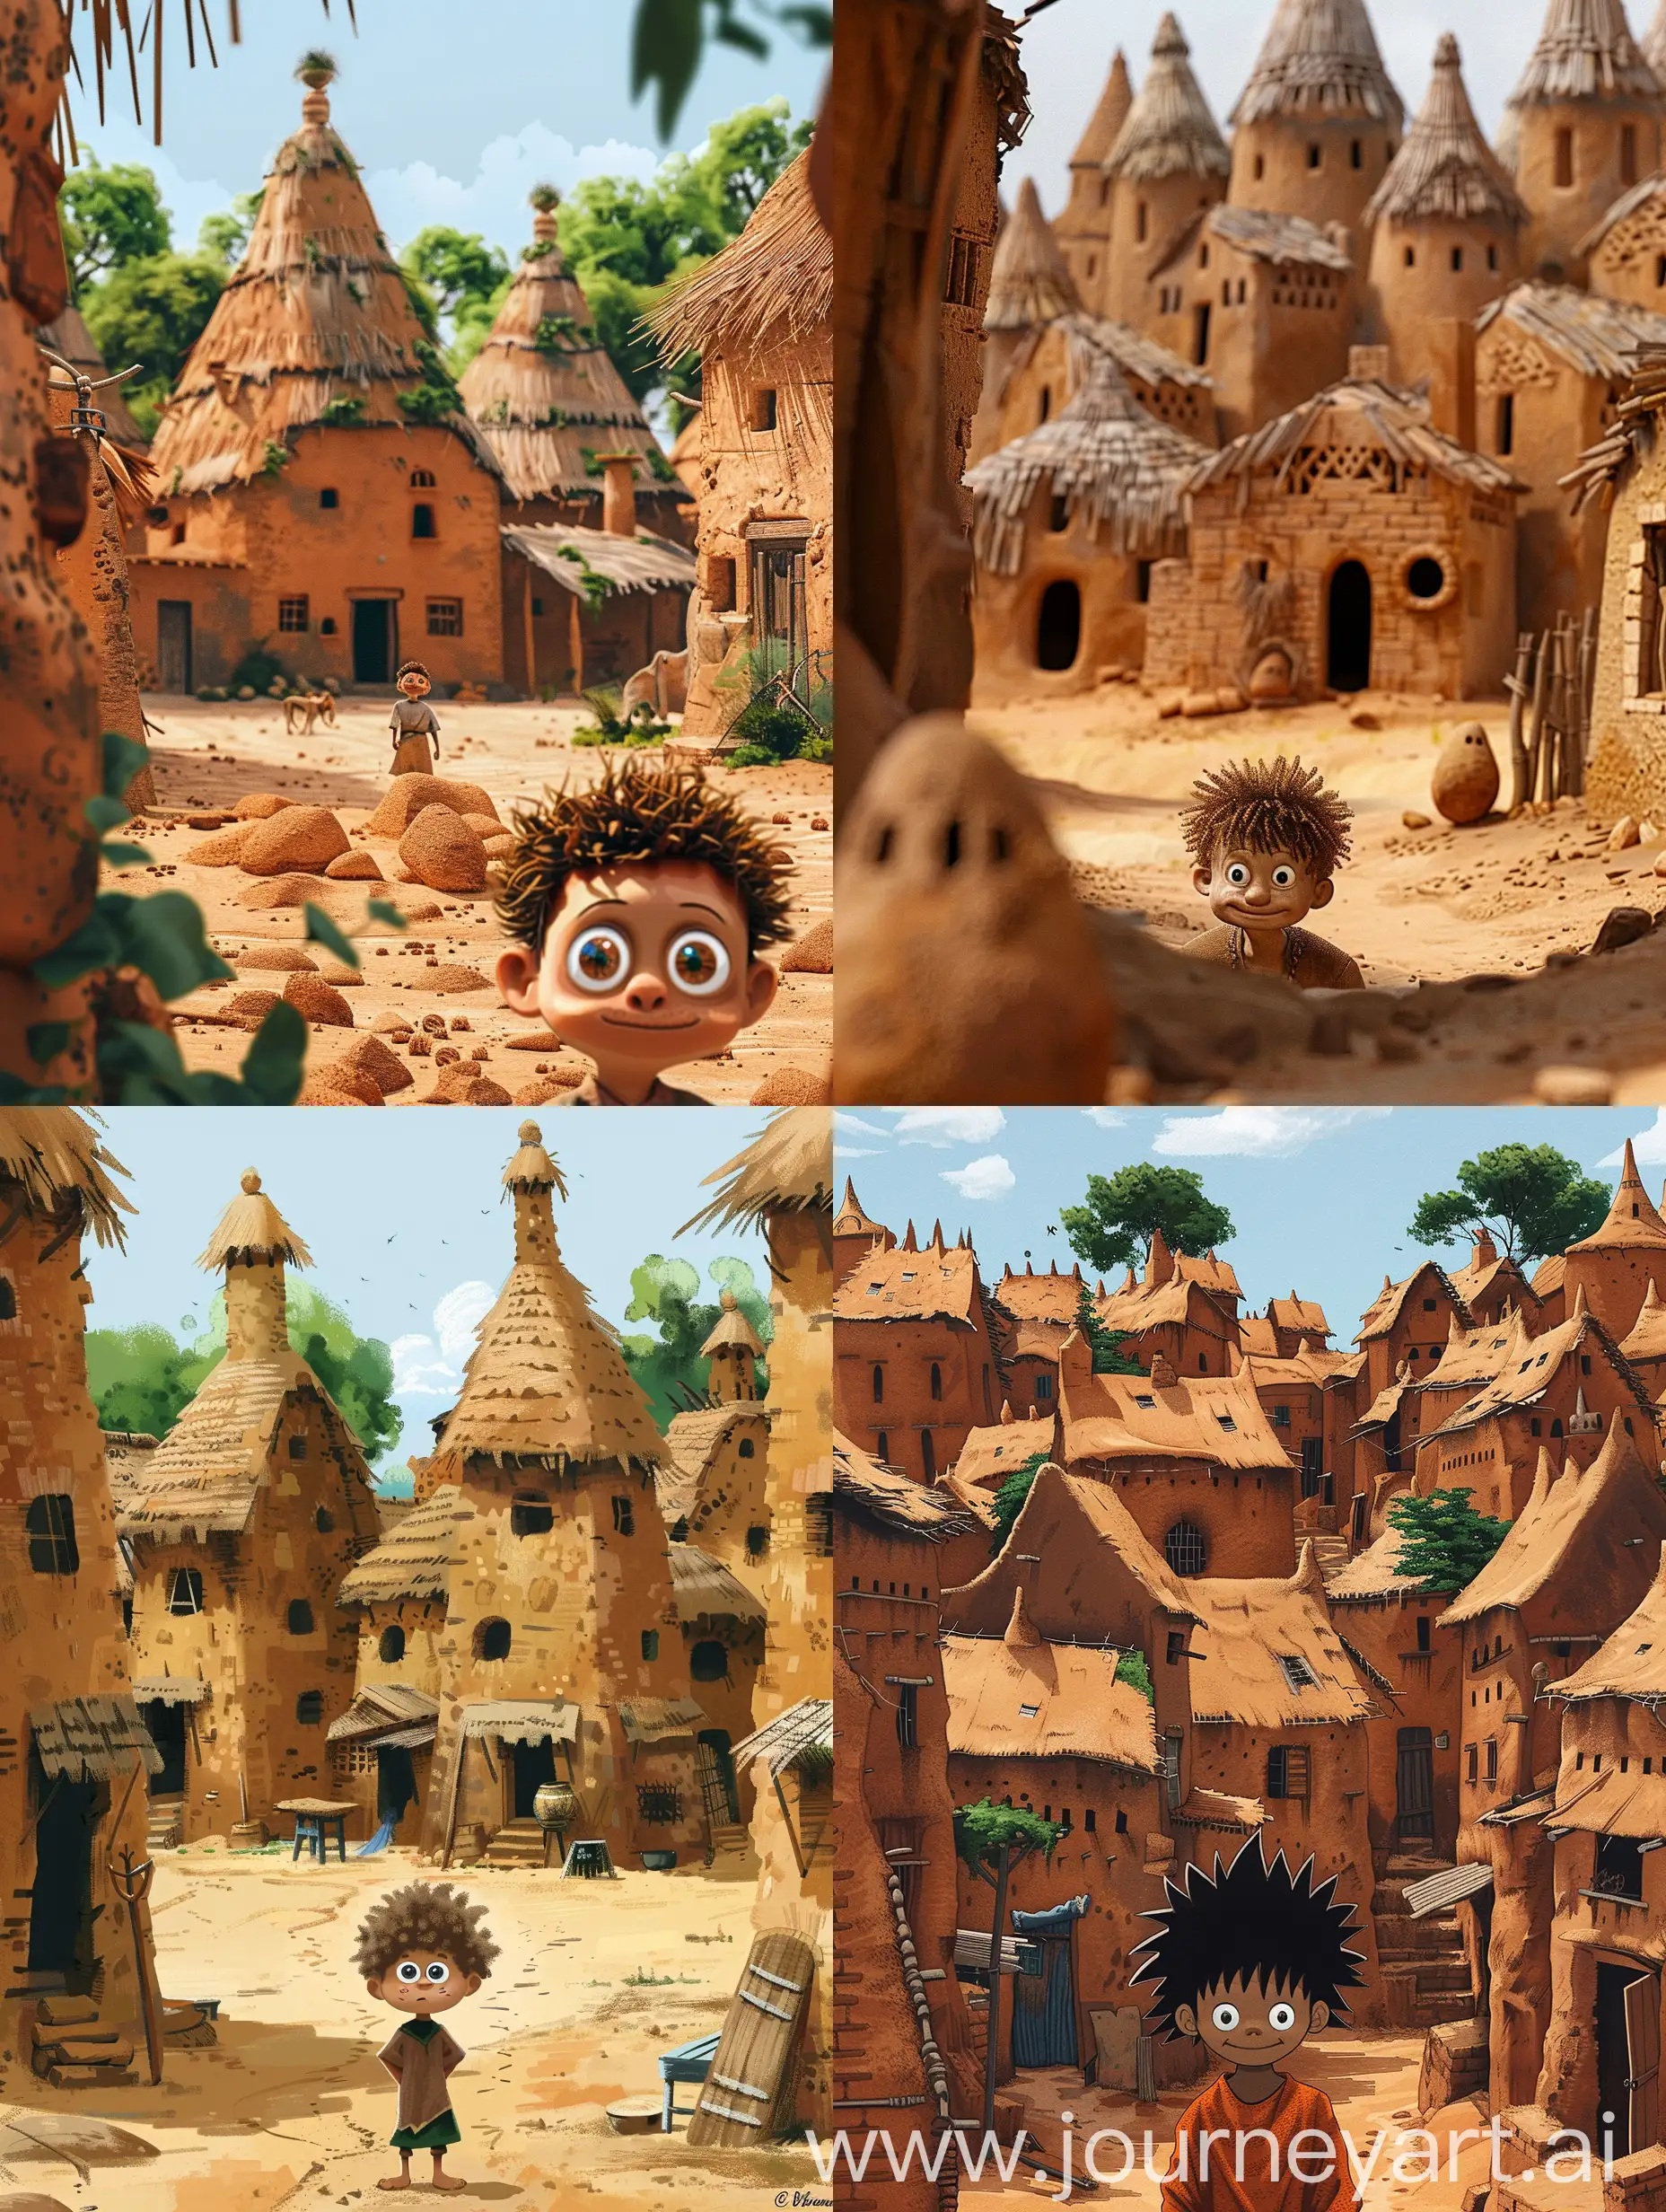 Charming-Village-Life-Curious-Boy-Amidst-MudBrick-Houses-with-Thatched-Roofs